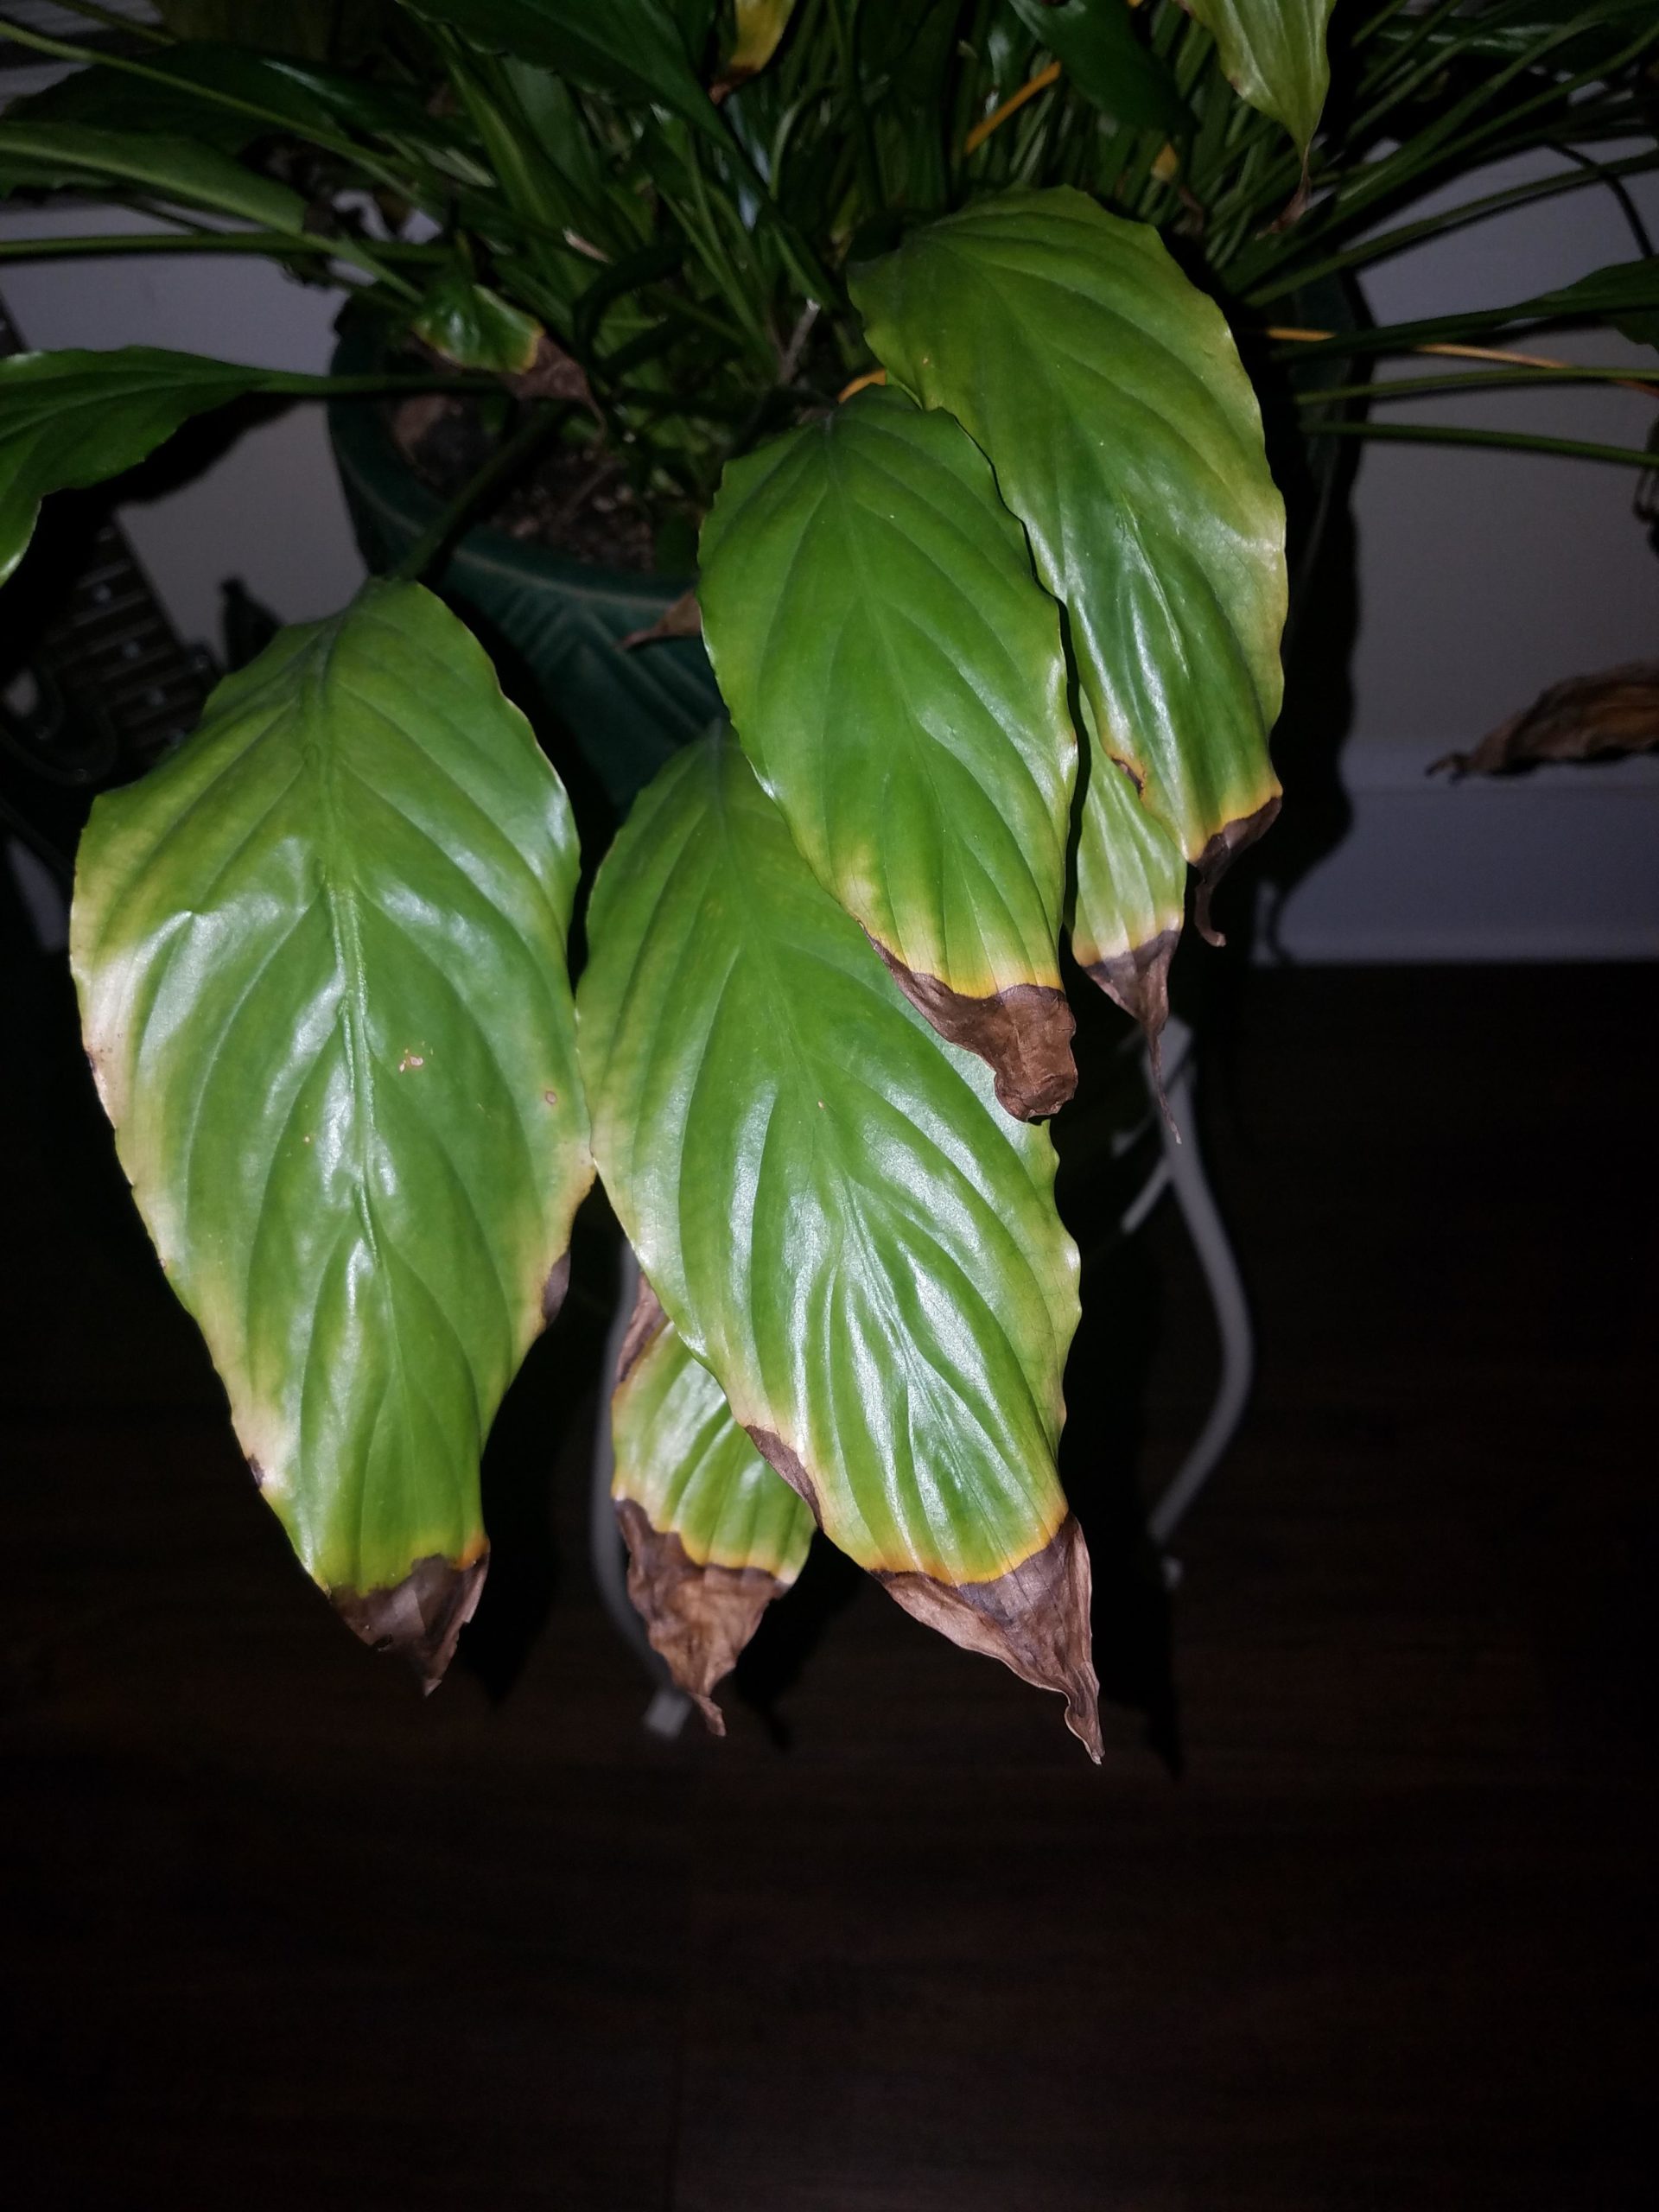 Why does my peace lily have brown tips?